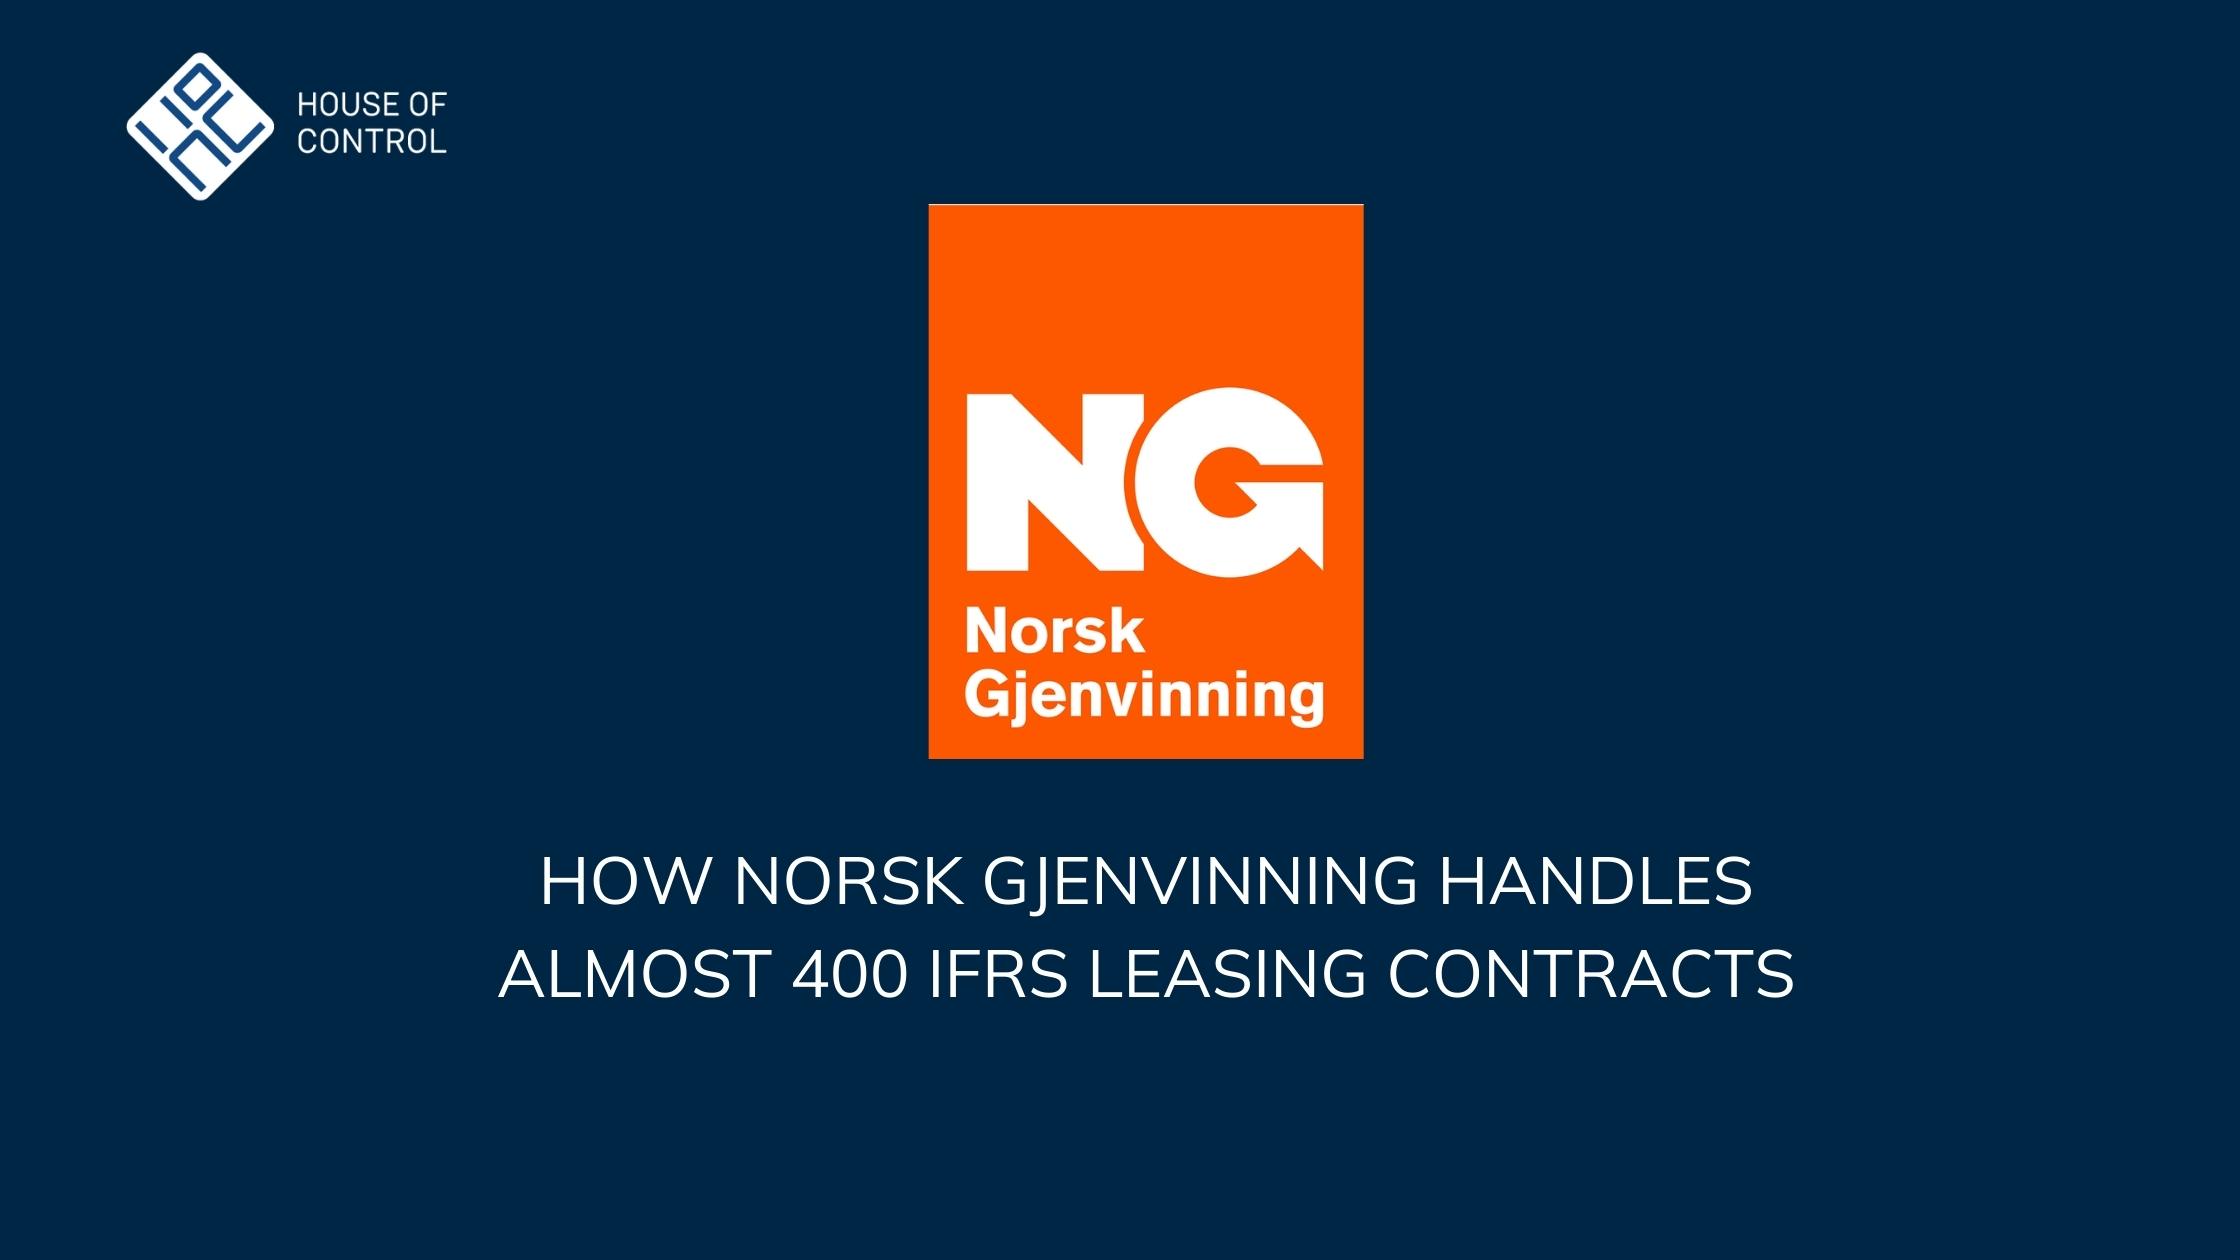 HOW NORSK GJENVINNING HANDLES ALMOST 400 IFRS LEASING CONTRACTS